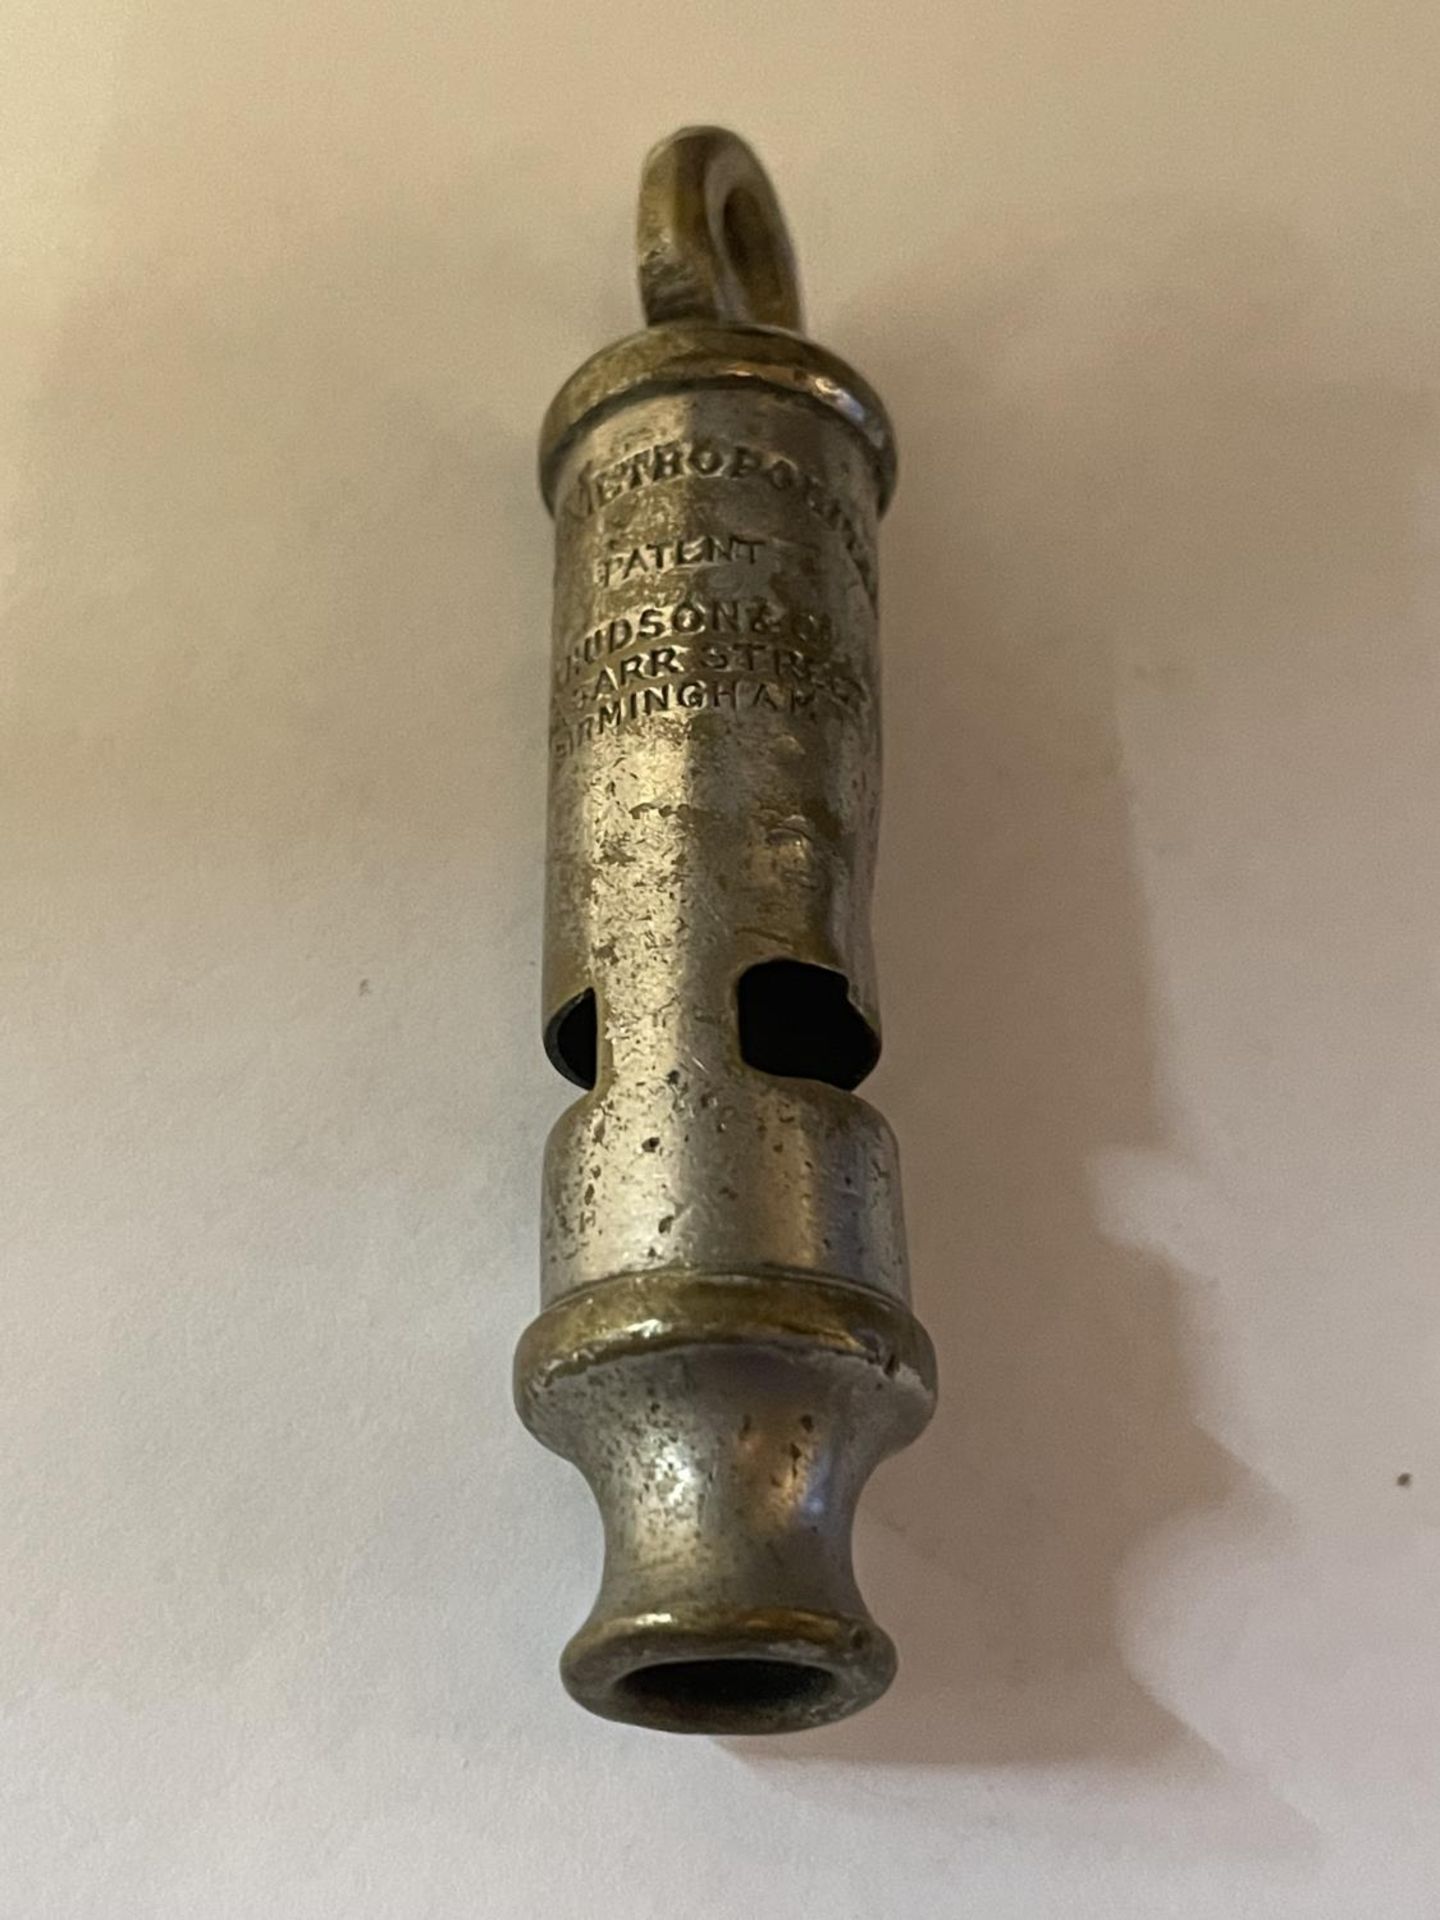 A RARE METROPOLITAN POLICE WHISTLE 1908 BY J HUDSON AND CO